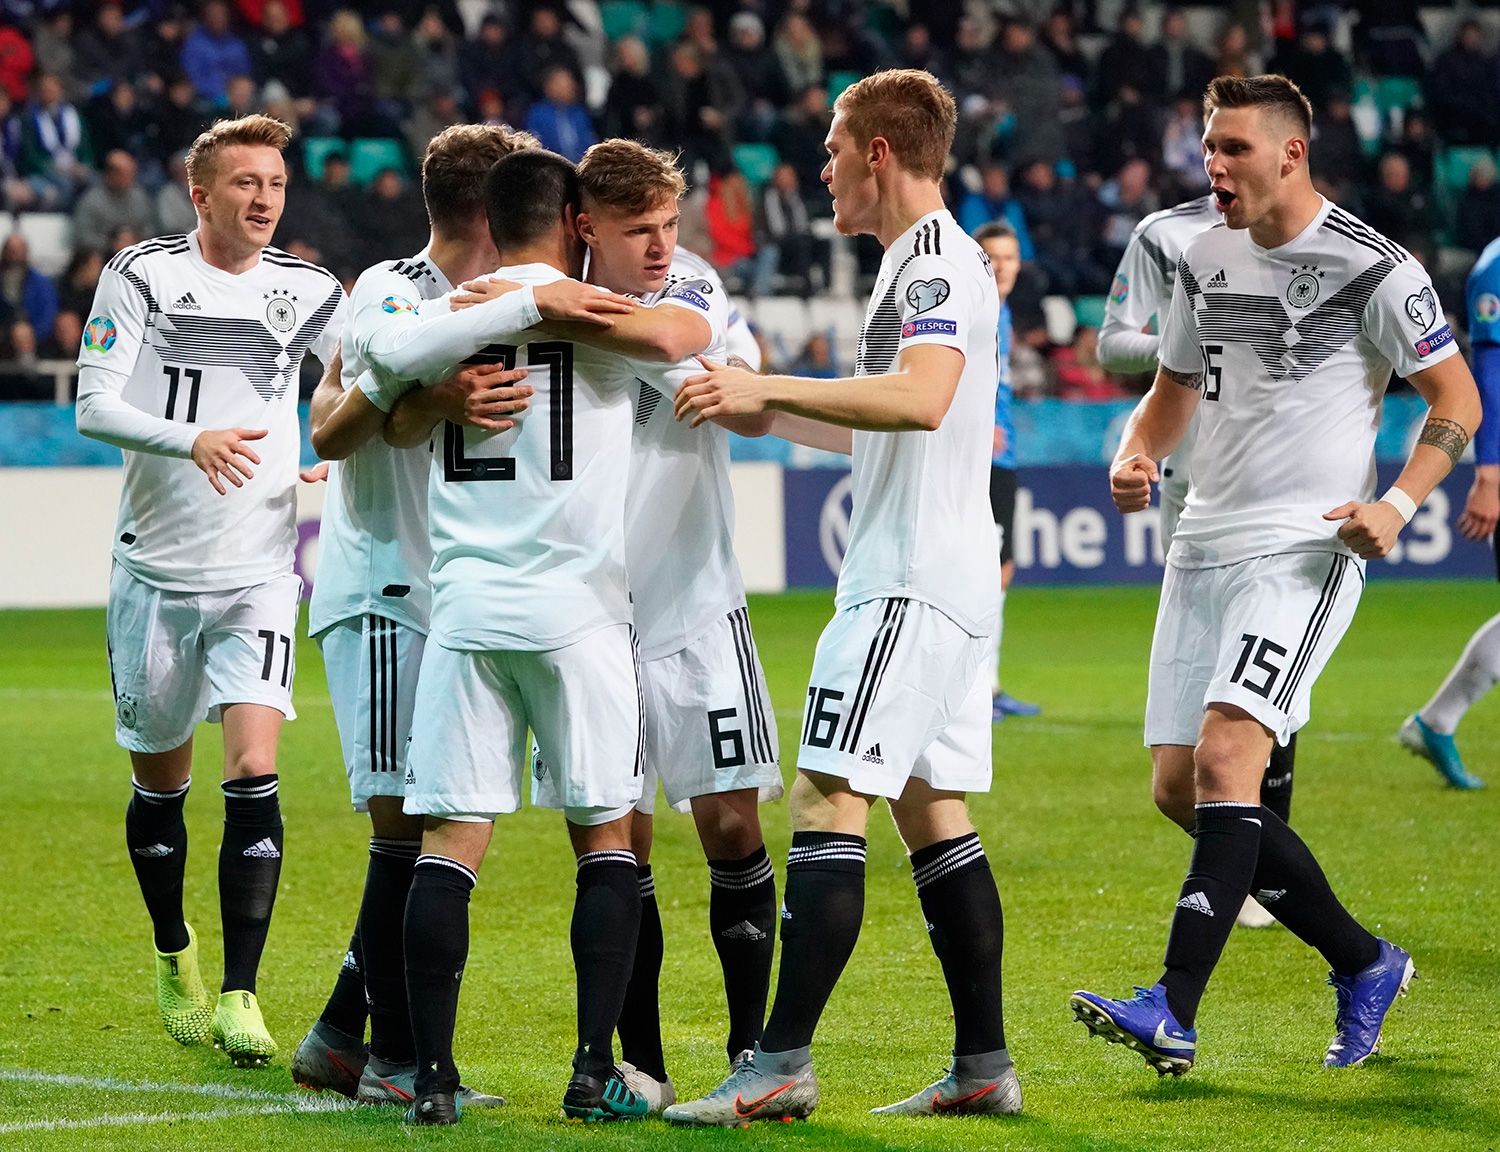 The players of Germany celebrate a goal against Estonia